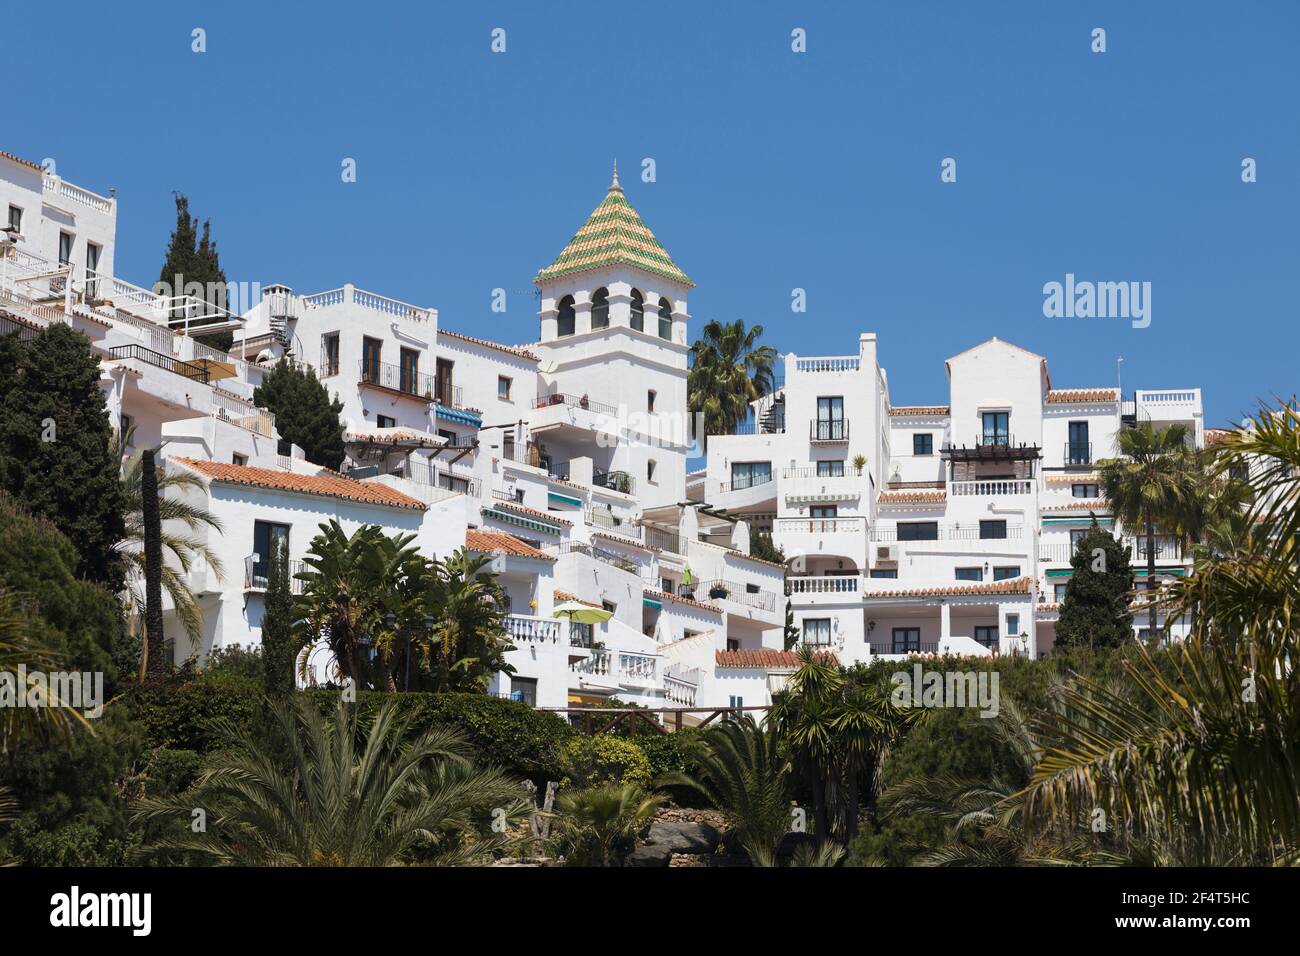 Nerja, Costa del Sol, Malaga Province, Andalusia, southern Spain. Property in Urbanization El Litoral behind the Burriana beach. Stock Photo